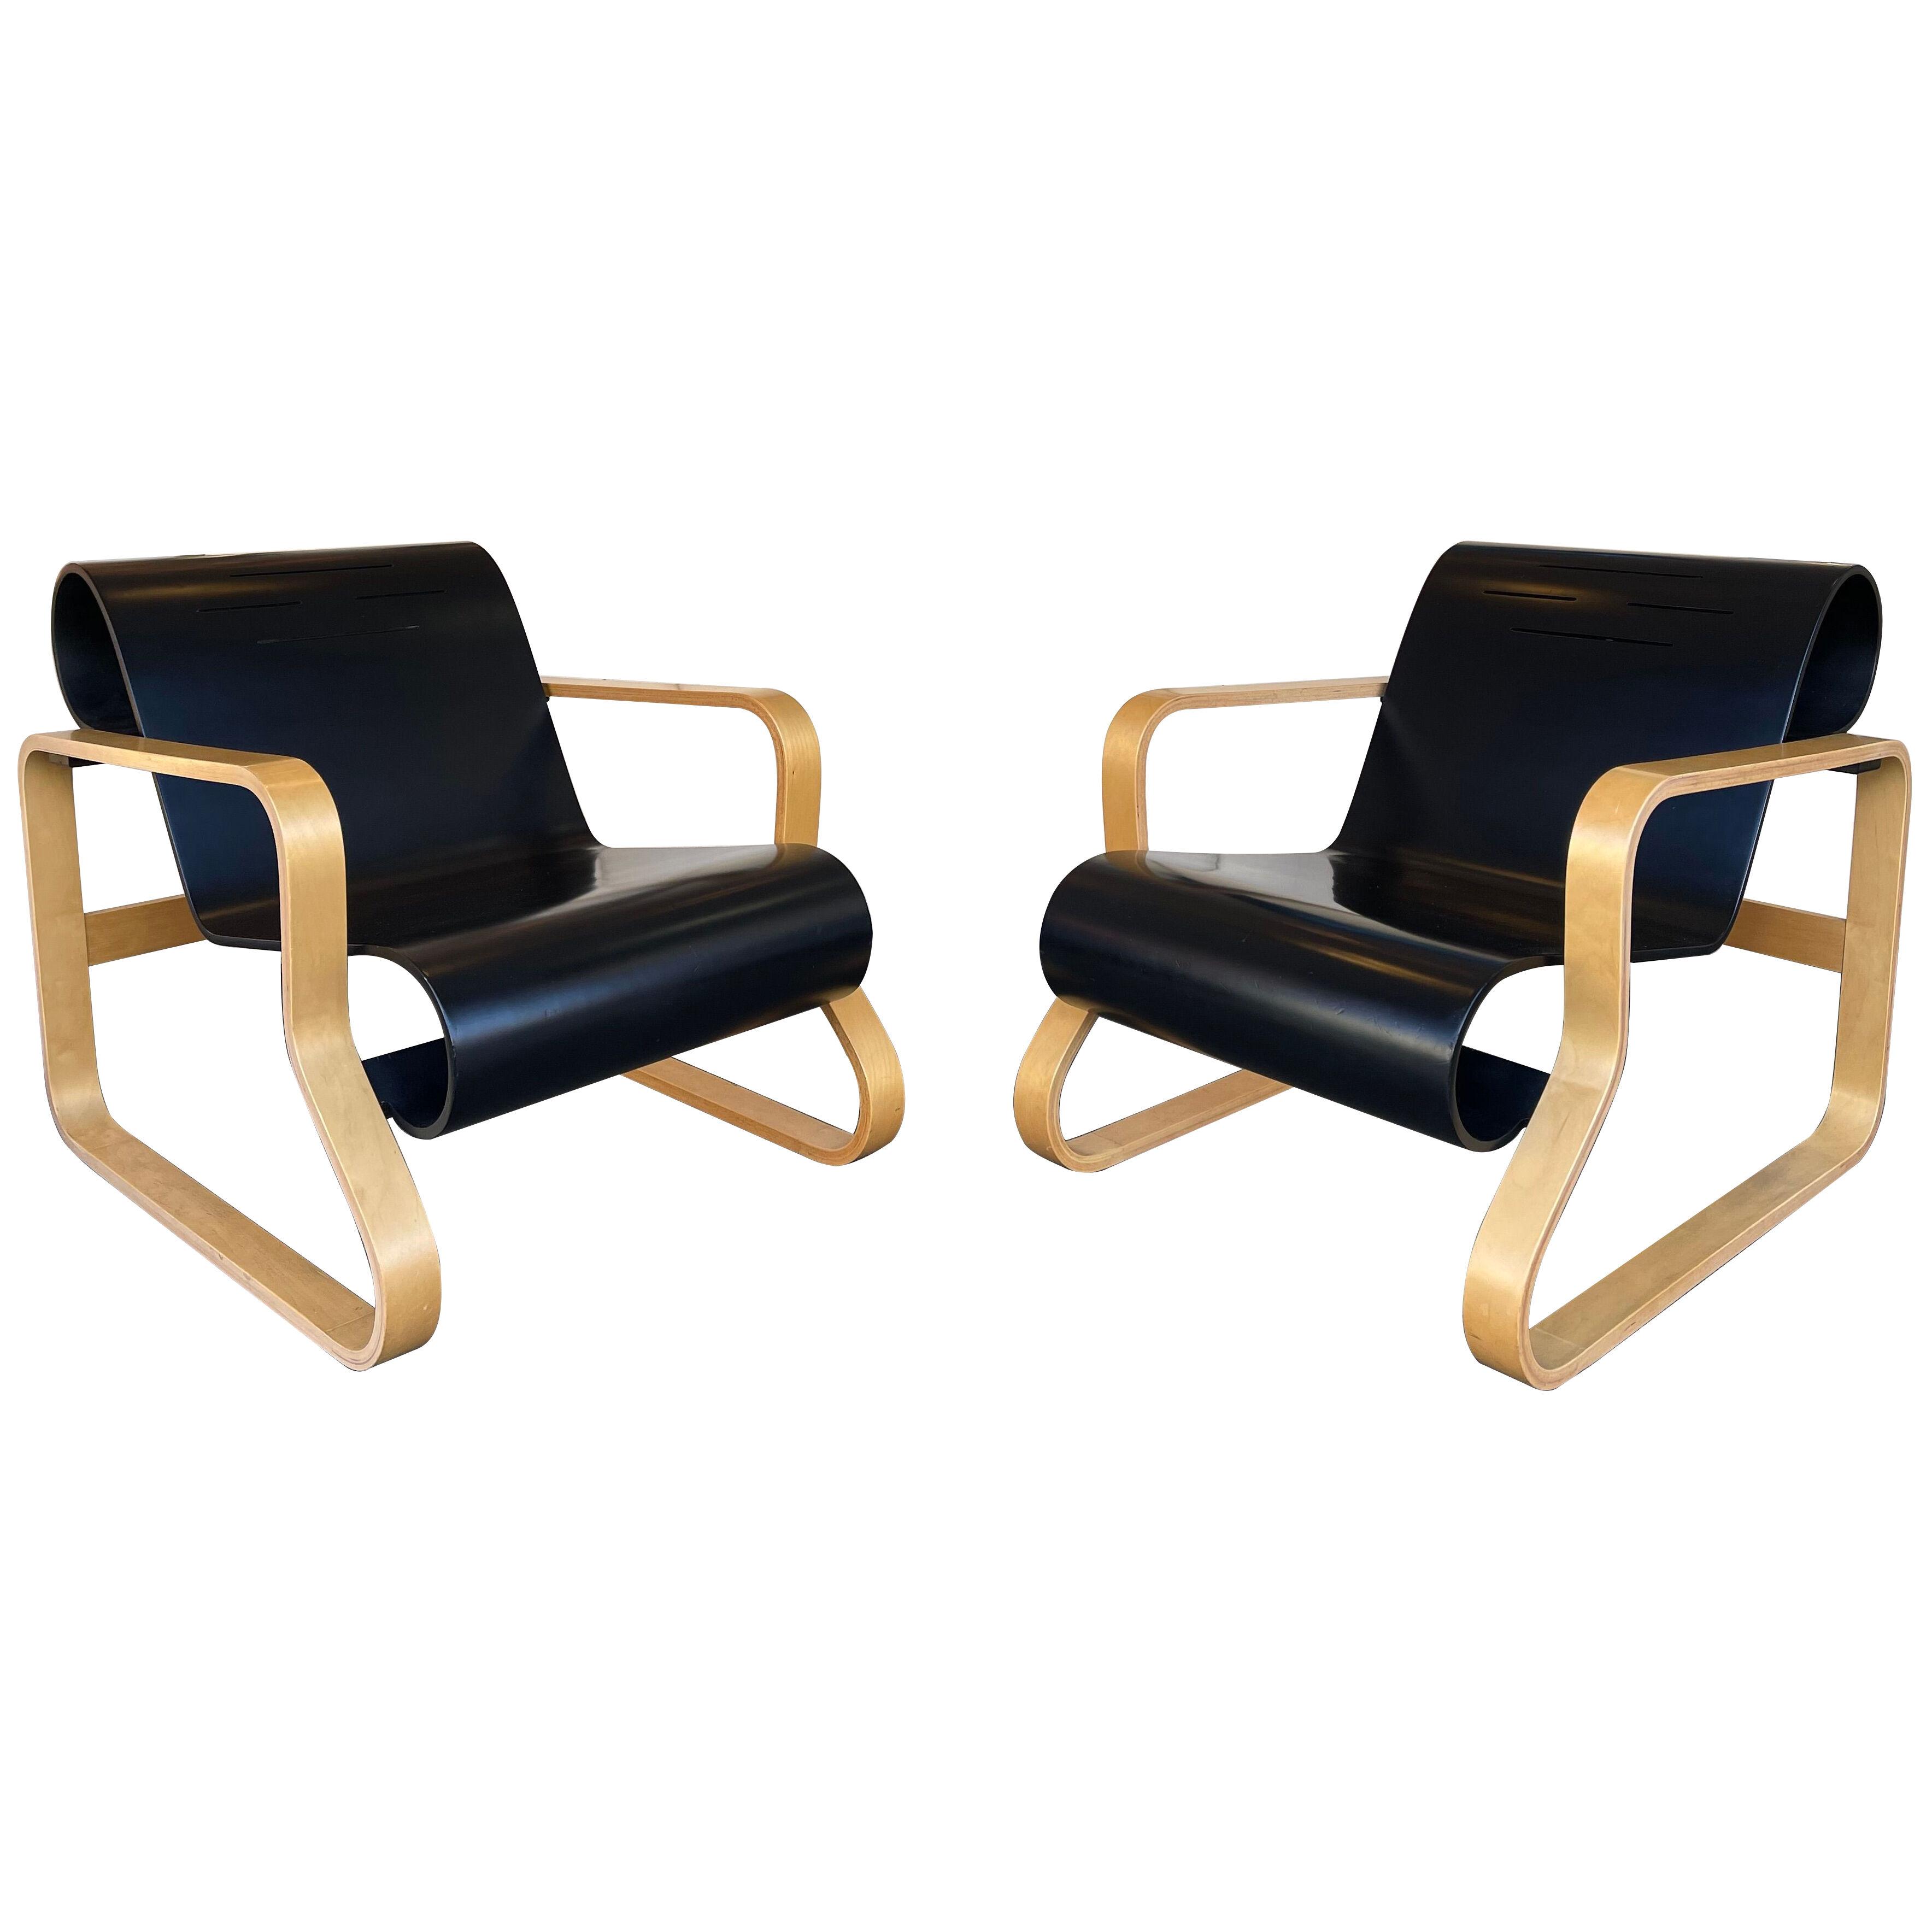 Pair of Wood Armchairs 41 Paimio by Alvar Aalto. Finland, 1930s